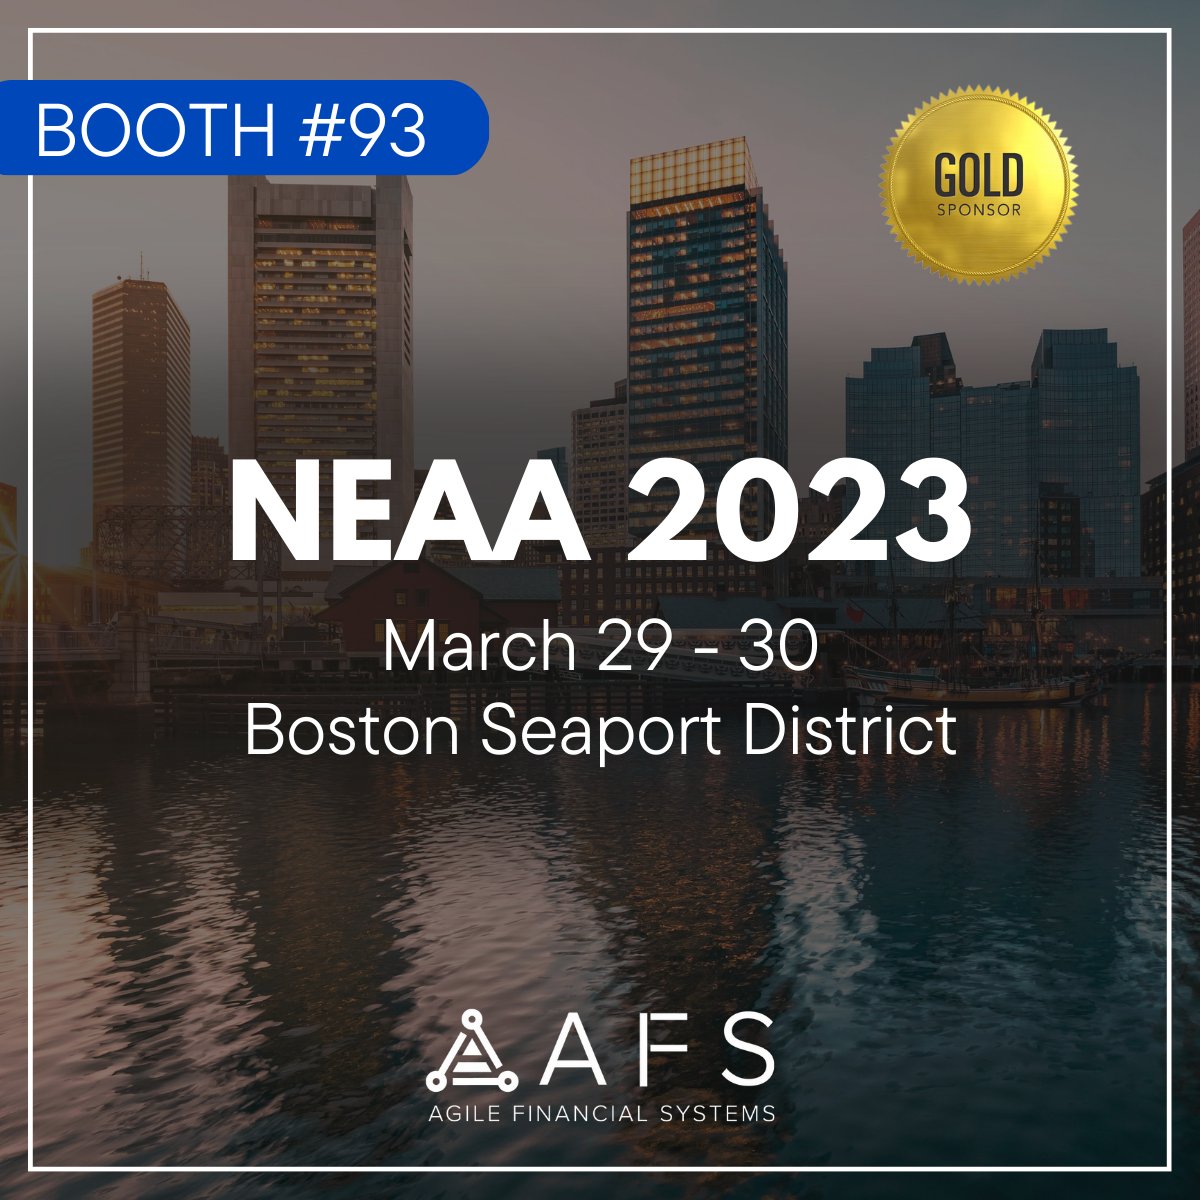 Come join us at #NEAA in Boston on March 29-30. AFS will be in booth #93, come chat with us! Can't wait to see you there!  

#NEAA2023 #AgileFinancialSystems #PaymentProcessing